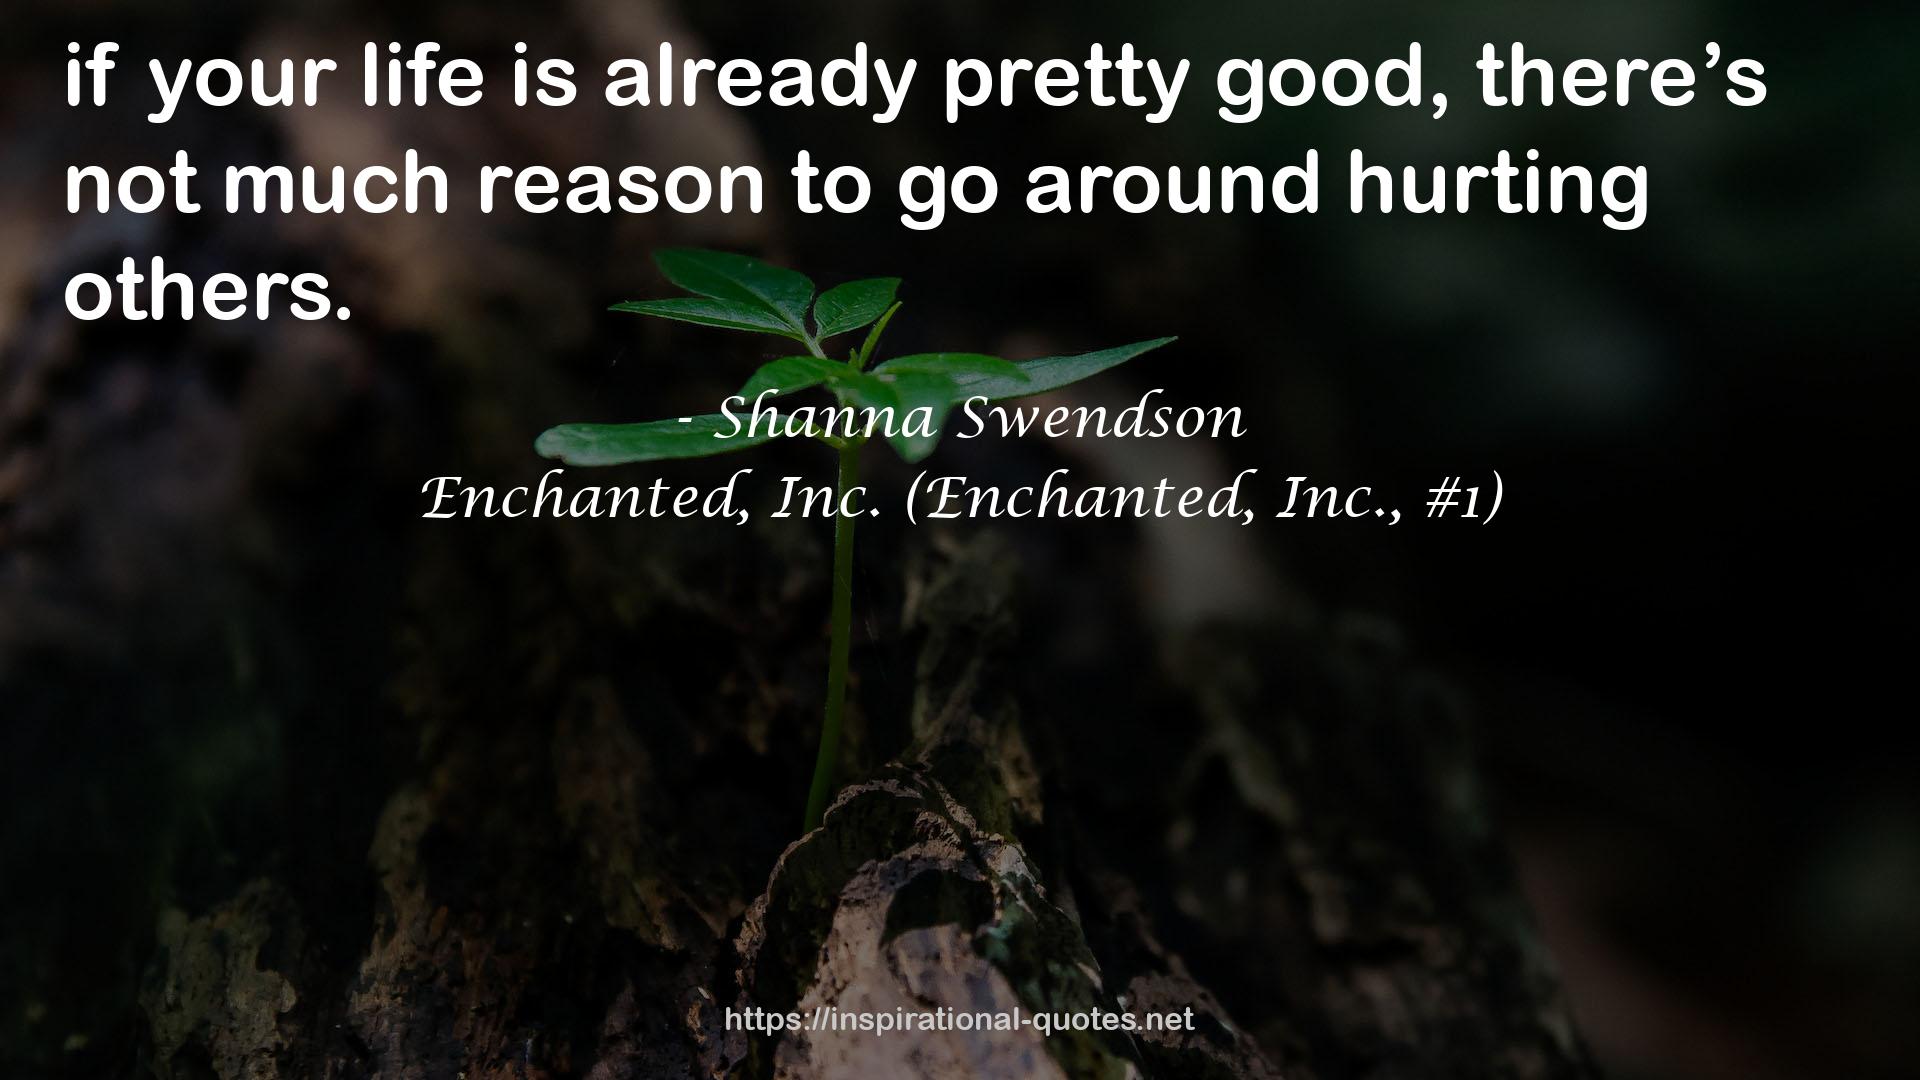 Shanna Swendson QUOTES